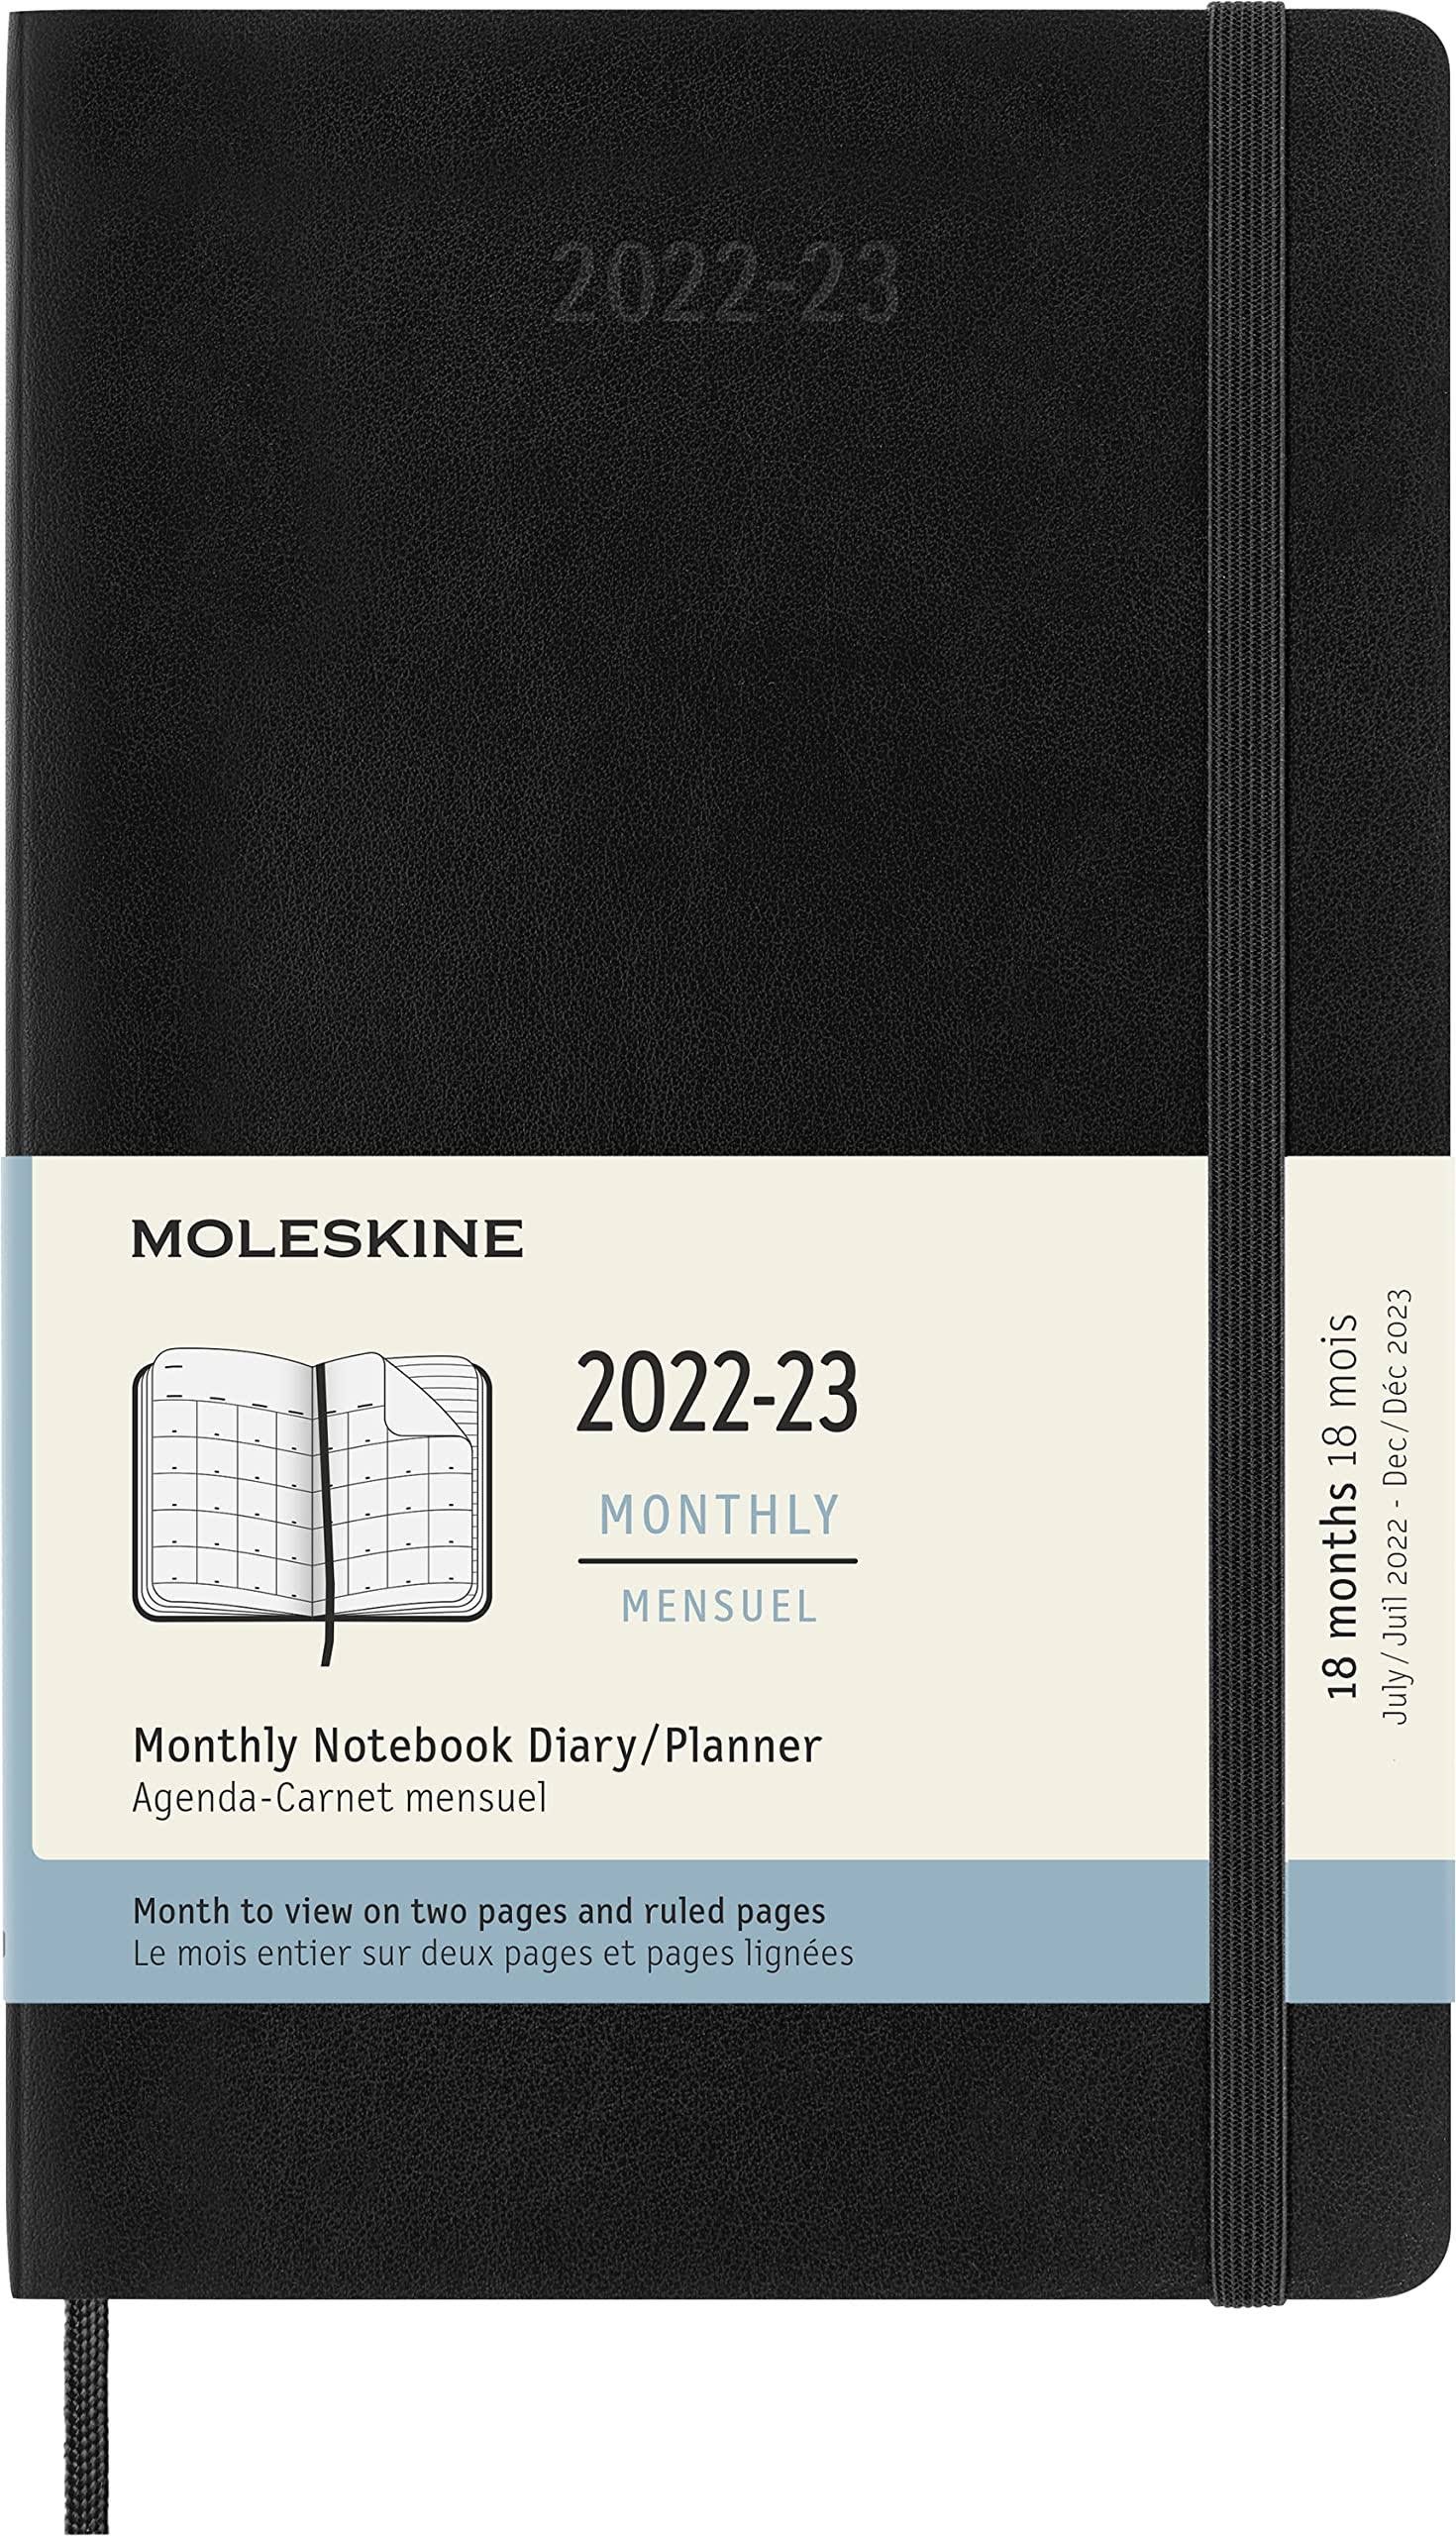 Moleskine 2023 18-month Monthly Large Softcover Notebook: Black